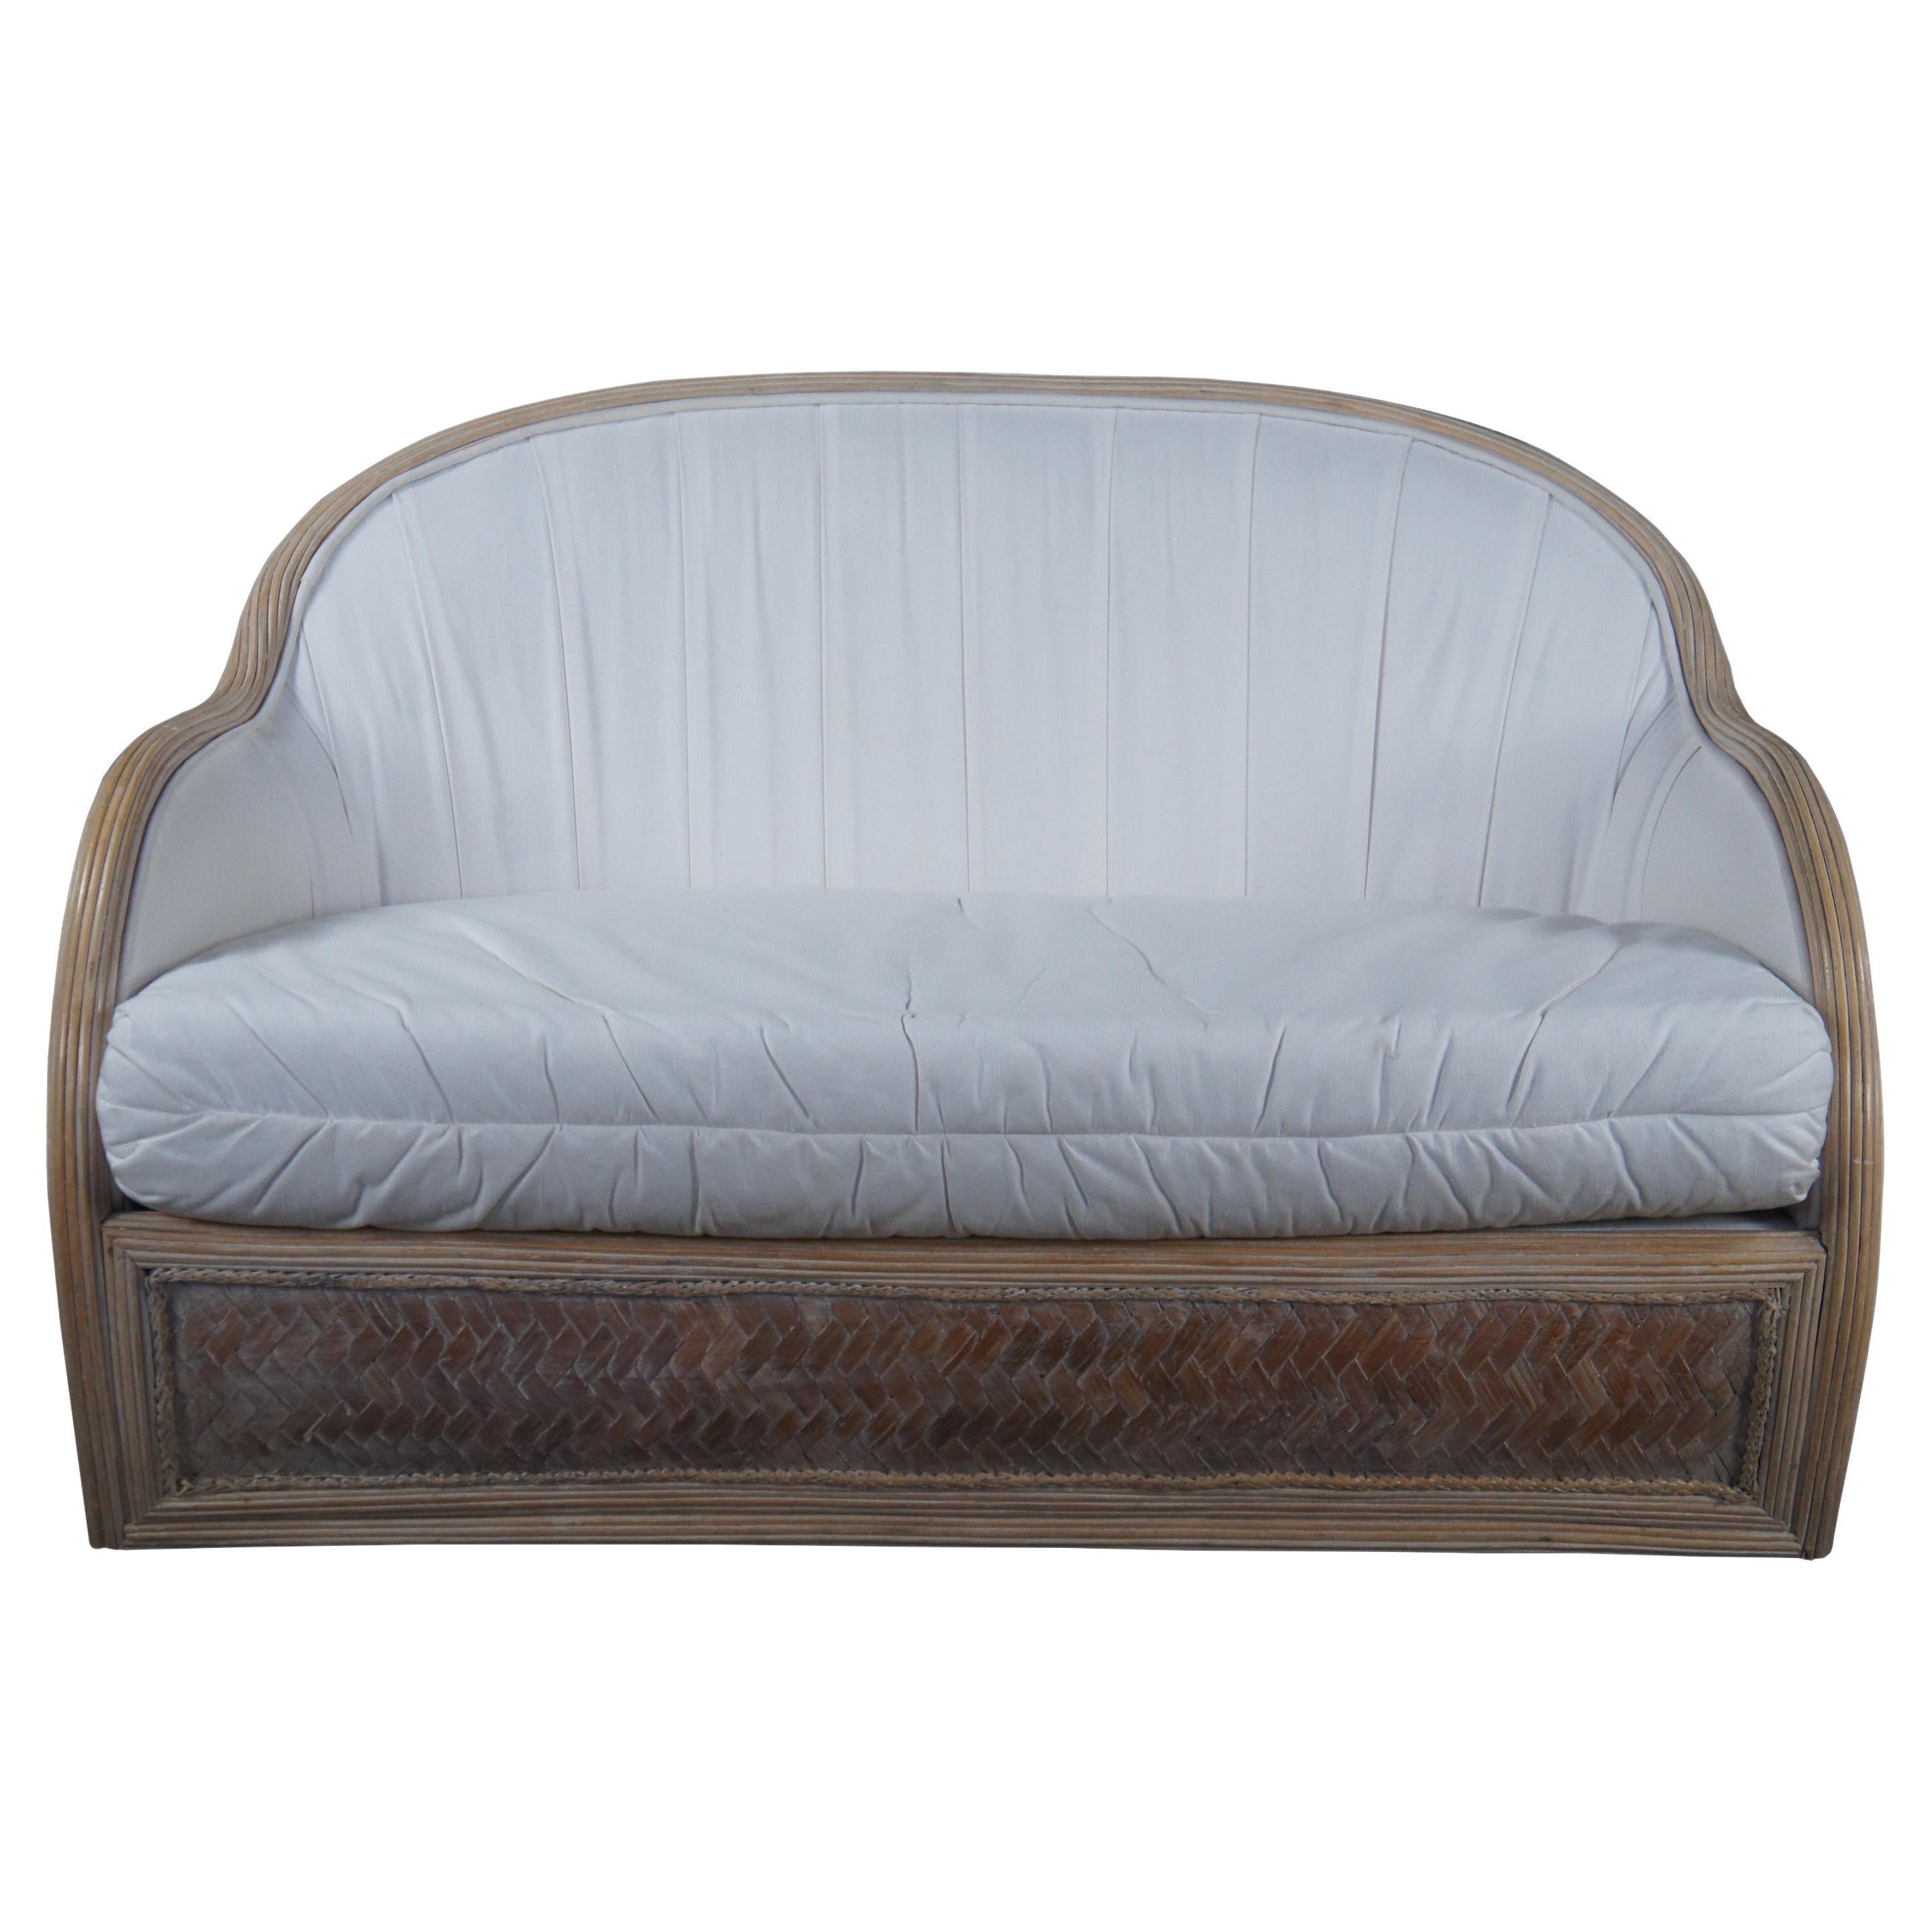 A quaint vintage Bohemian barrel back loveseat, circa 1970s. Made from a contoured split reed frame with woven rattan panels. Features a white upholstery with removable cushion. Perfect for a library, den or sunroom.